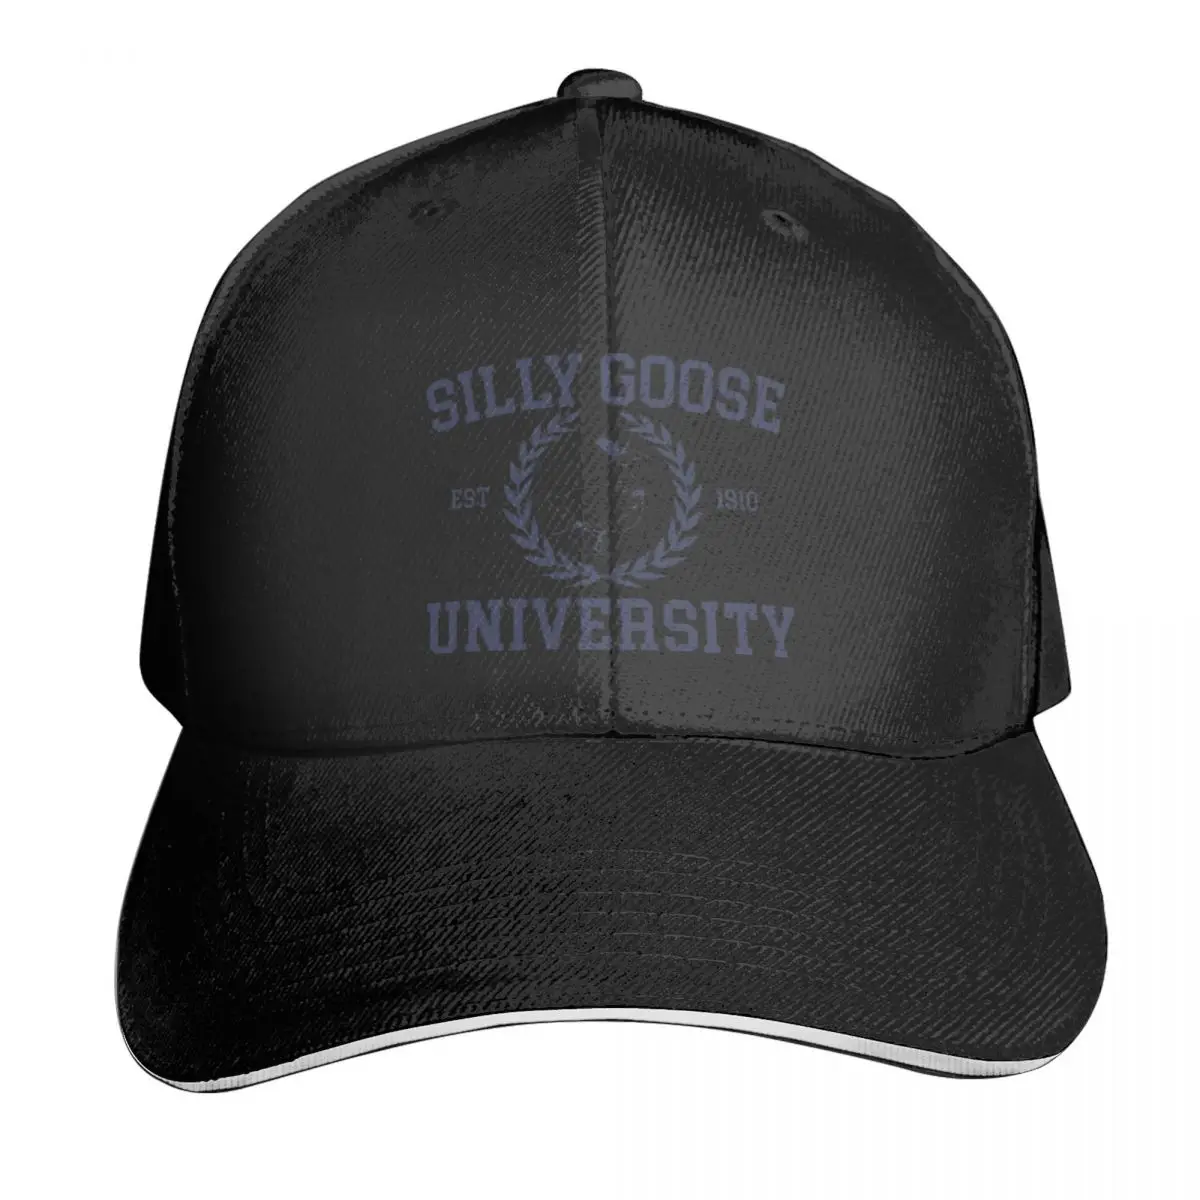 

Silly Goose University Casquette, Polyester Cap Customizable Wicking Birthday Gift